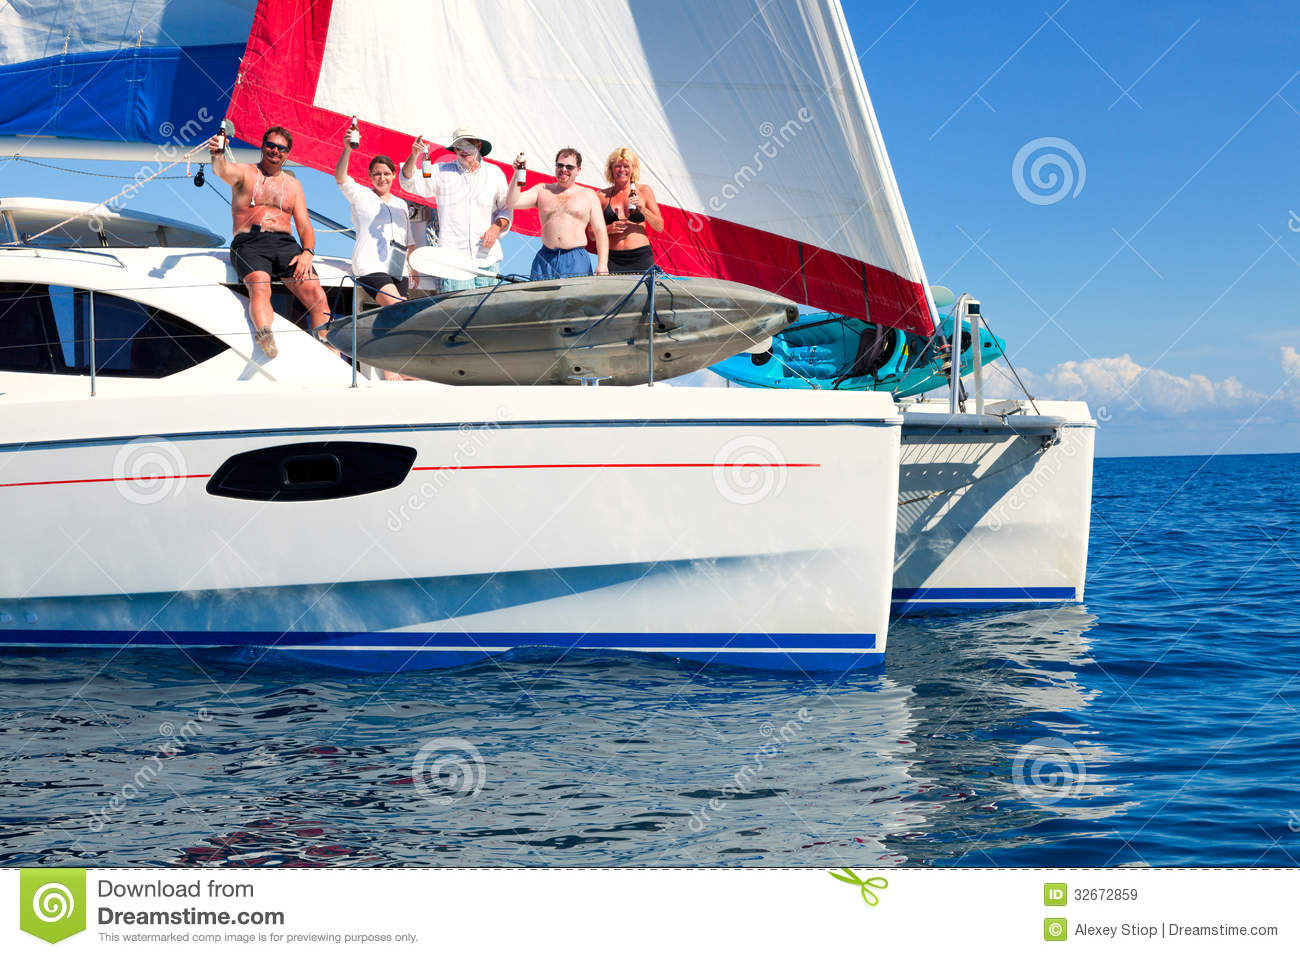 Sailboat In The Open Sea With Sailing Crew Partying On The Deck 